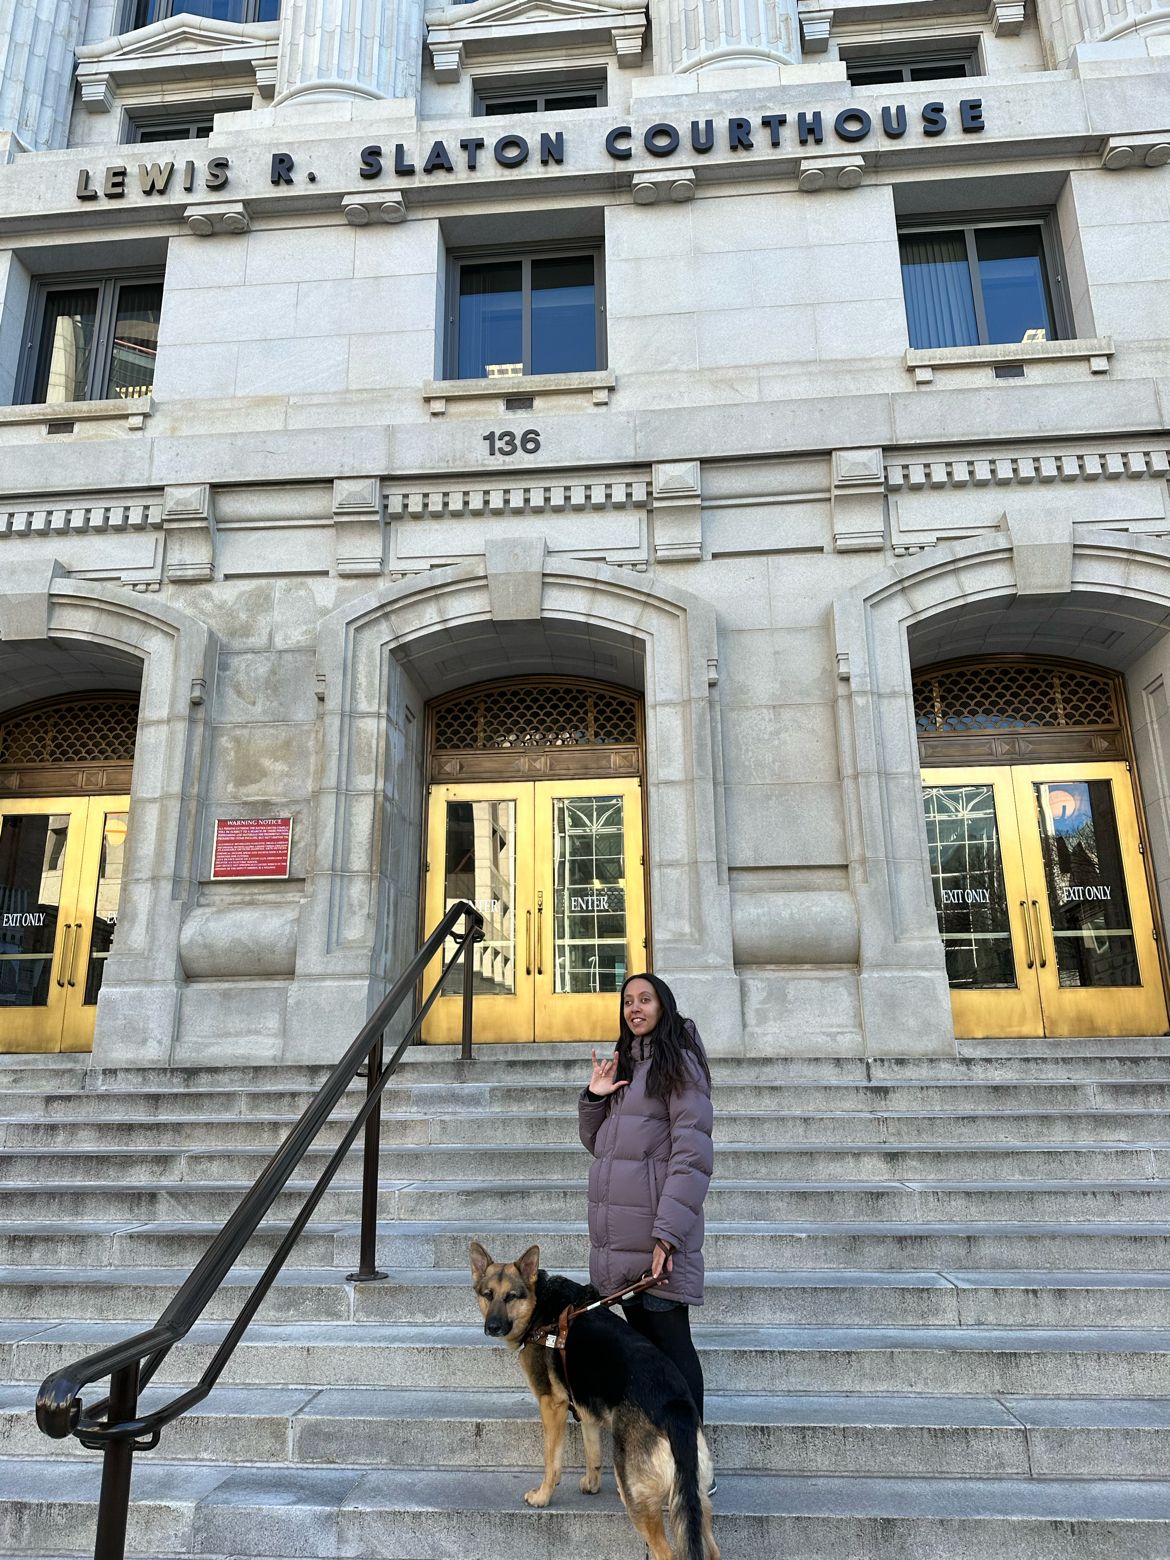 Seeing Eye dog Mylo and I stand on the steps of the Lewis R. Slaton Courthouse. I’m smiling and signing ILY. Behind us, the courthouse doors glow golden in the sun.